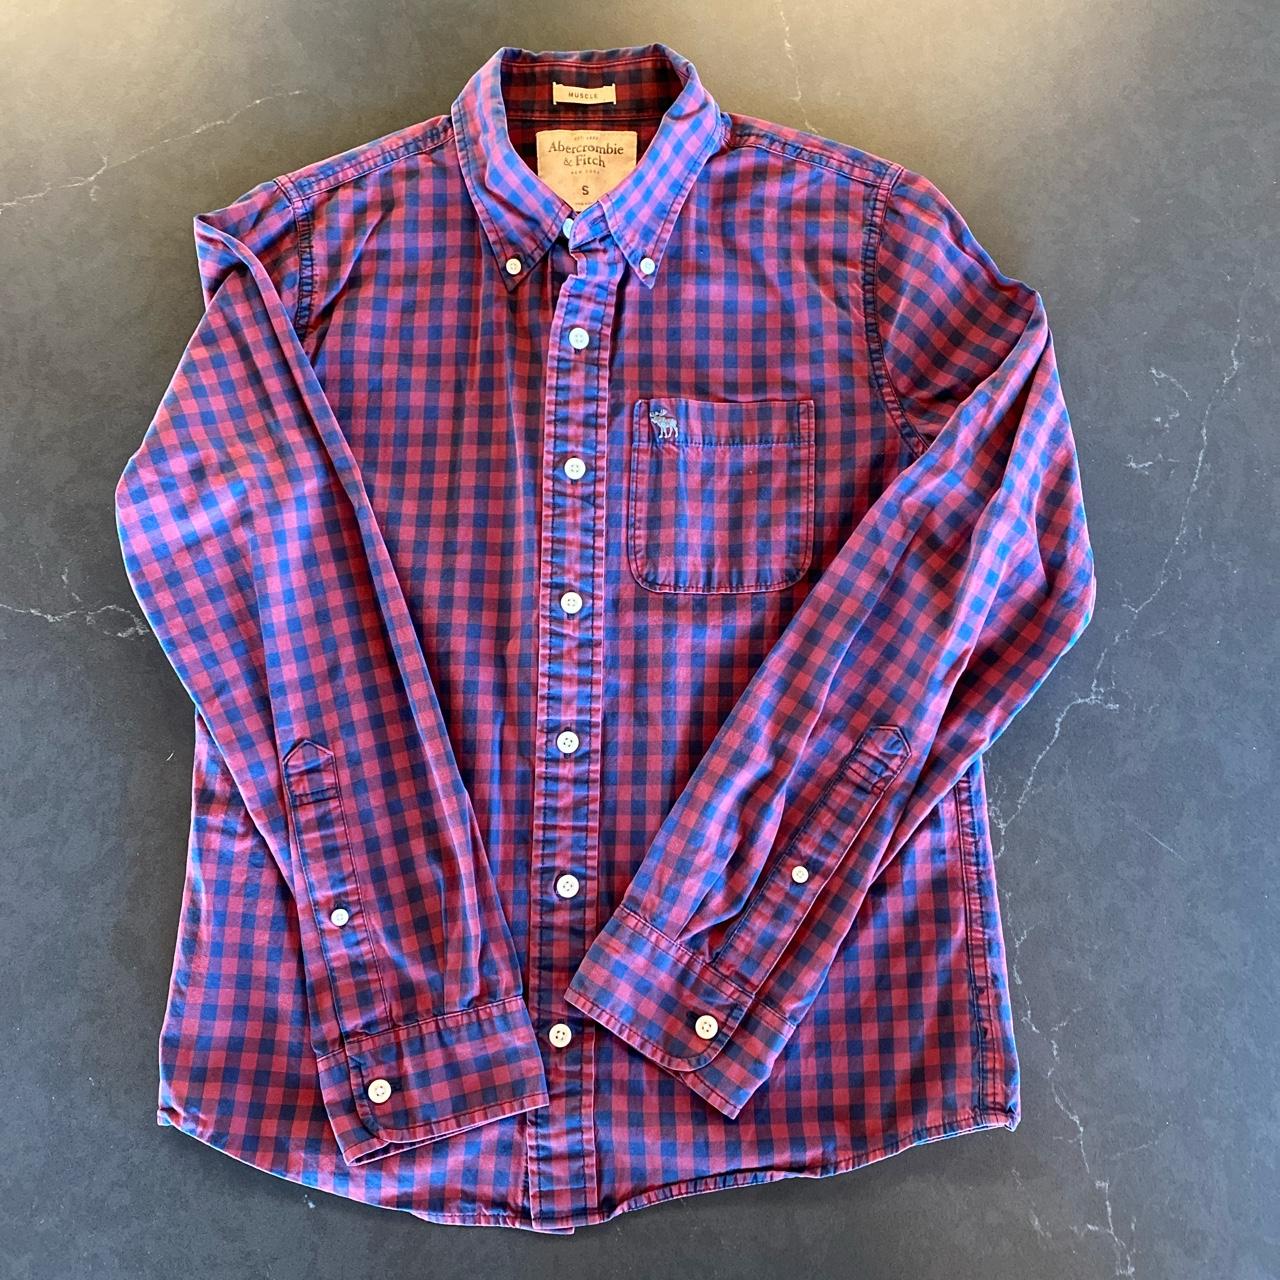 Abercrombie & Fitch Men's Blue and Red Shirt (2)